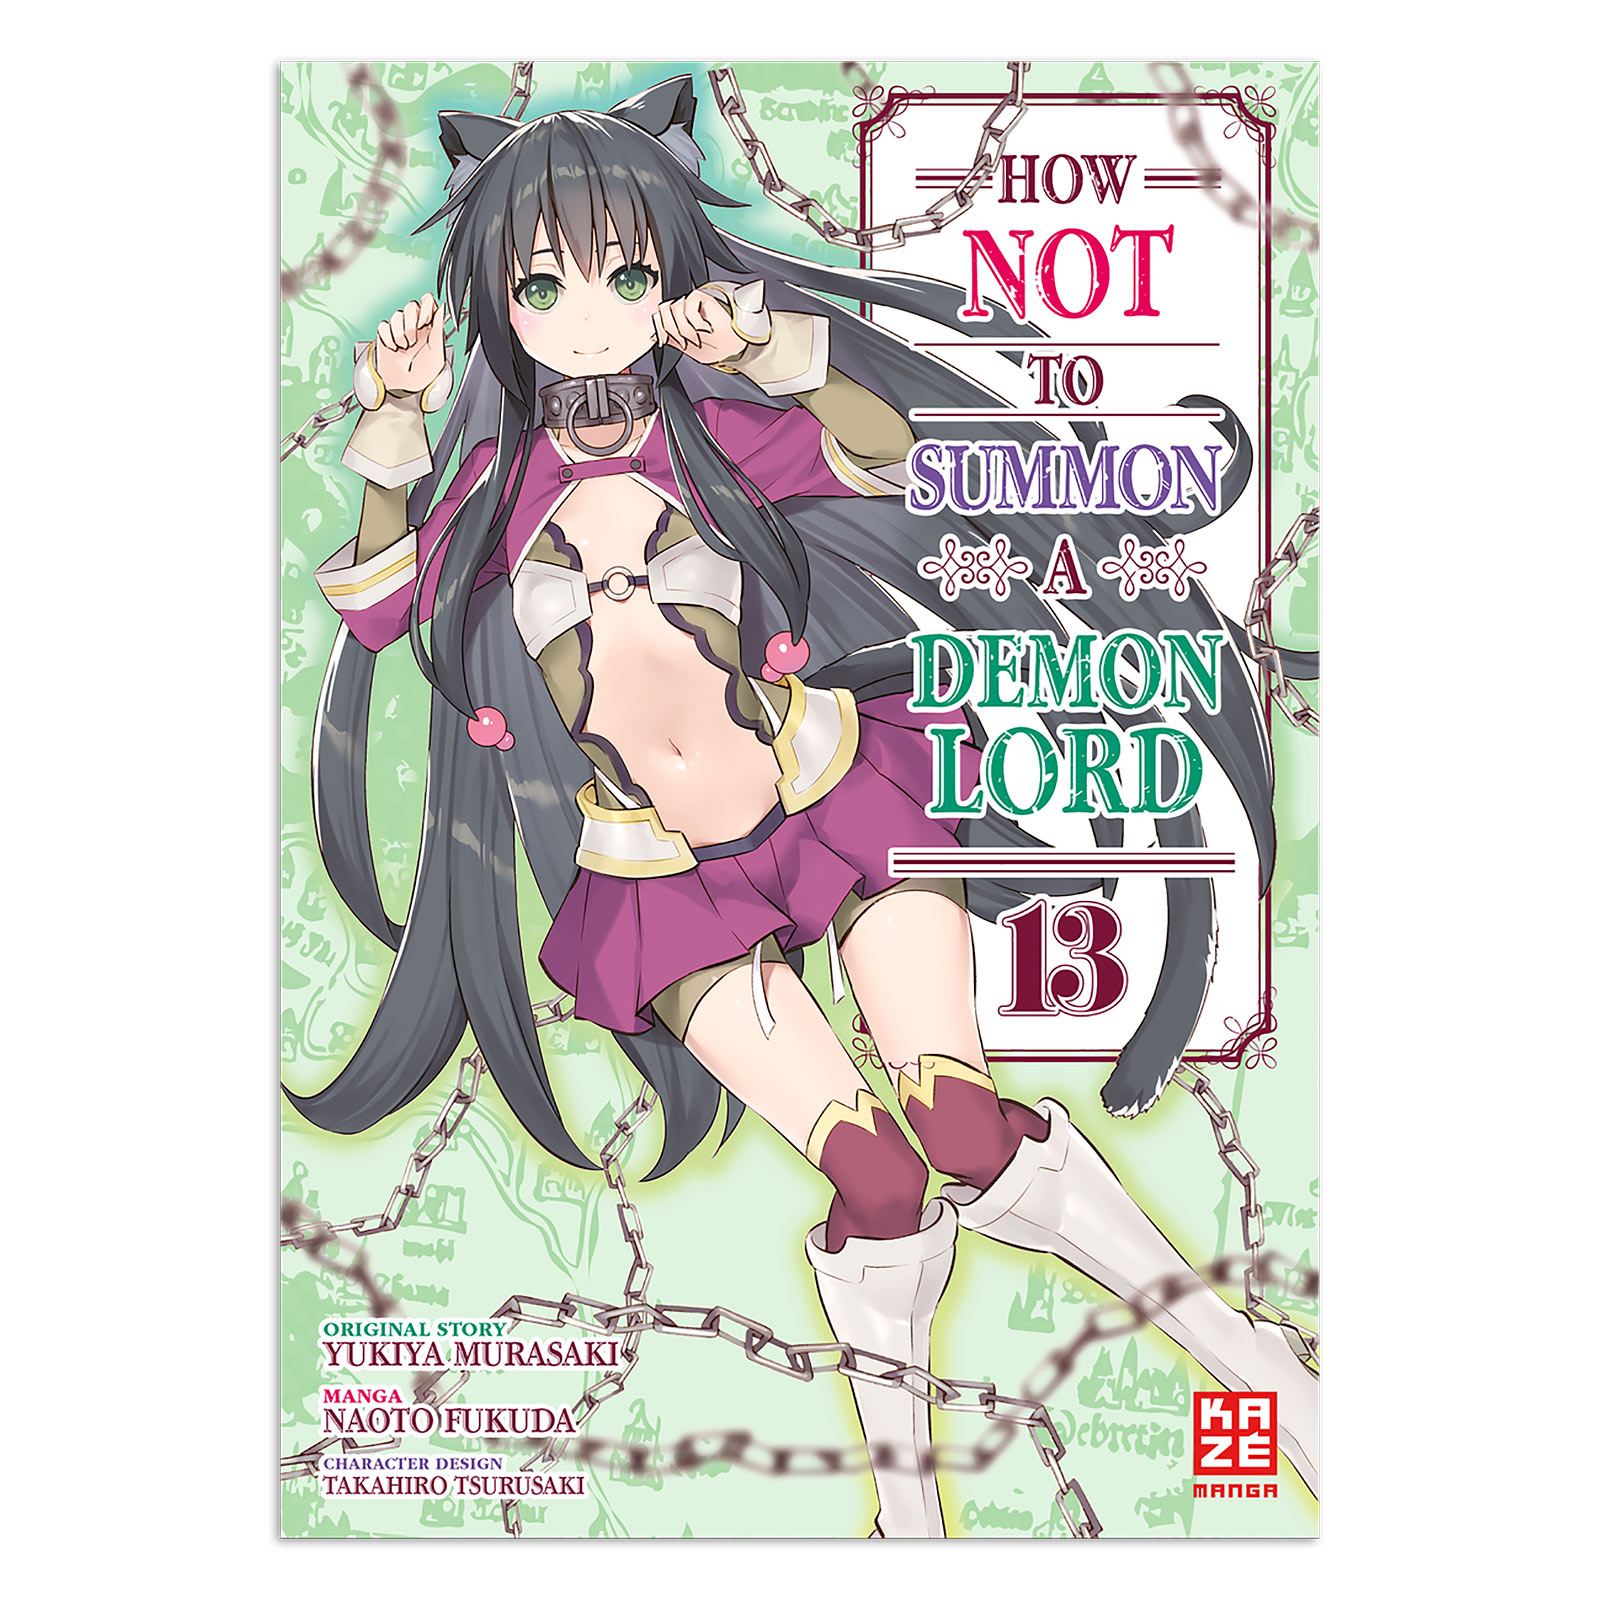 How NOT to Summon a Demon Lord - Manga Band 13